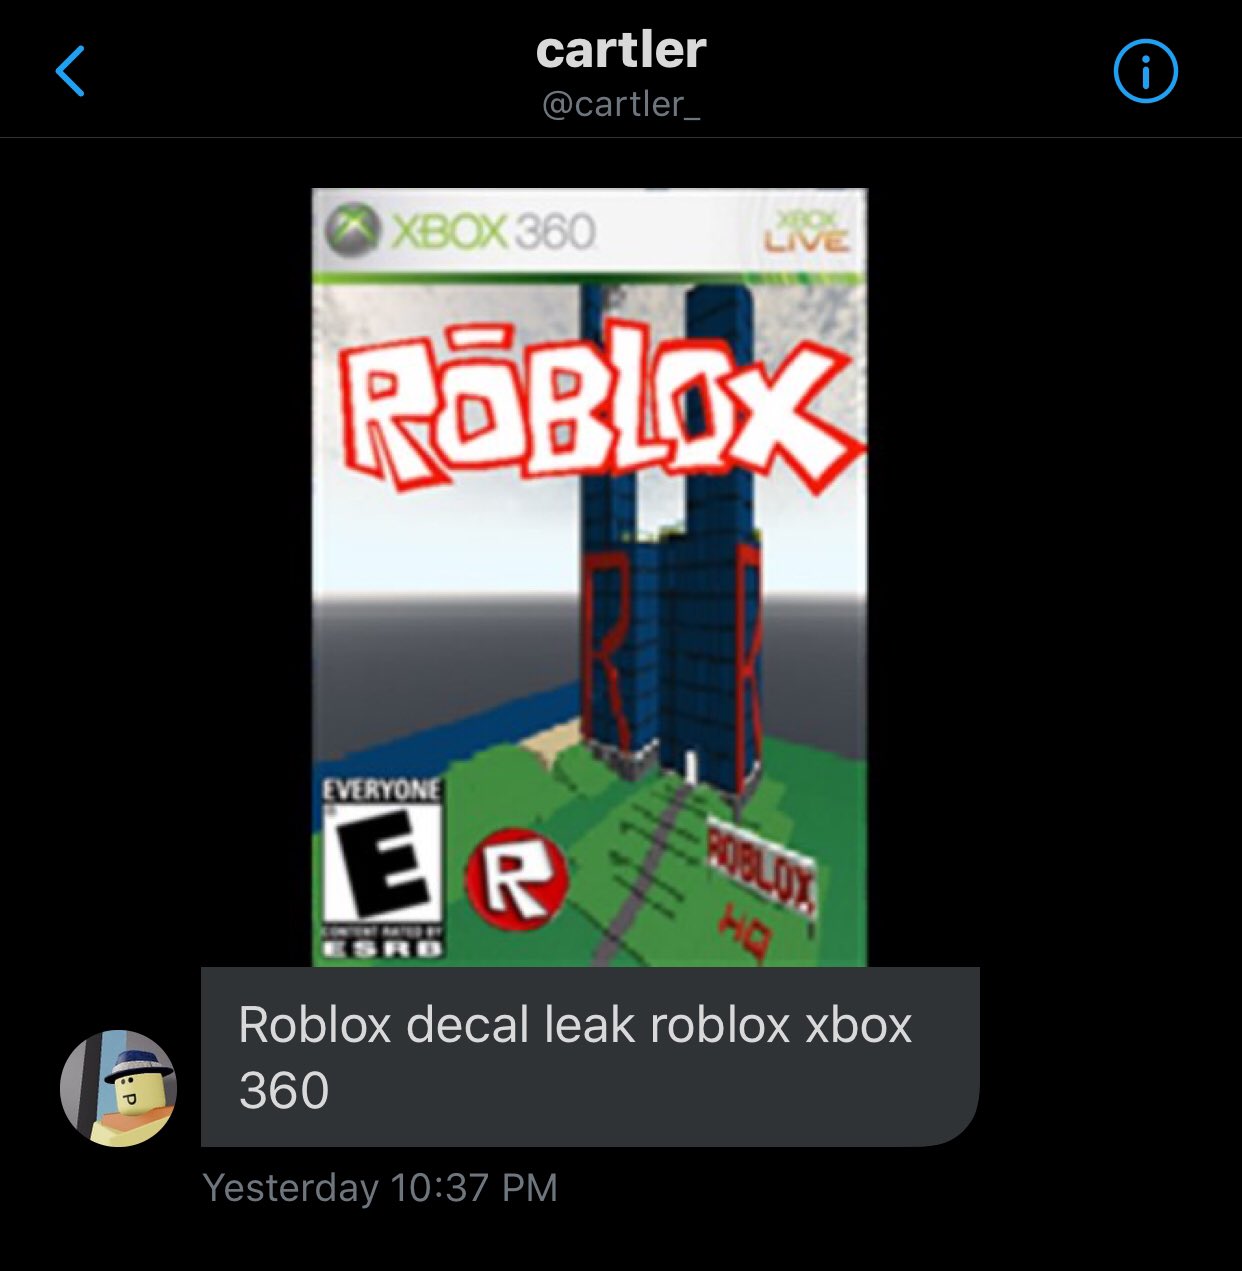 News Roblox On Twitter Roblox On Xbox 360 - roblox xbox decal